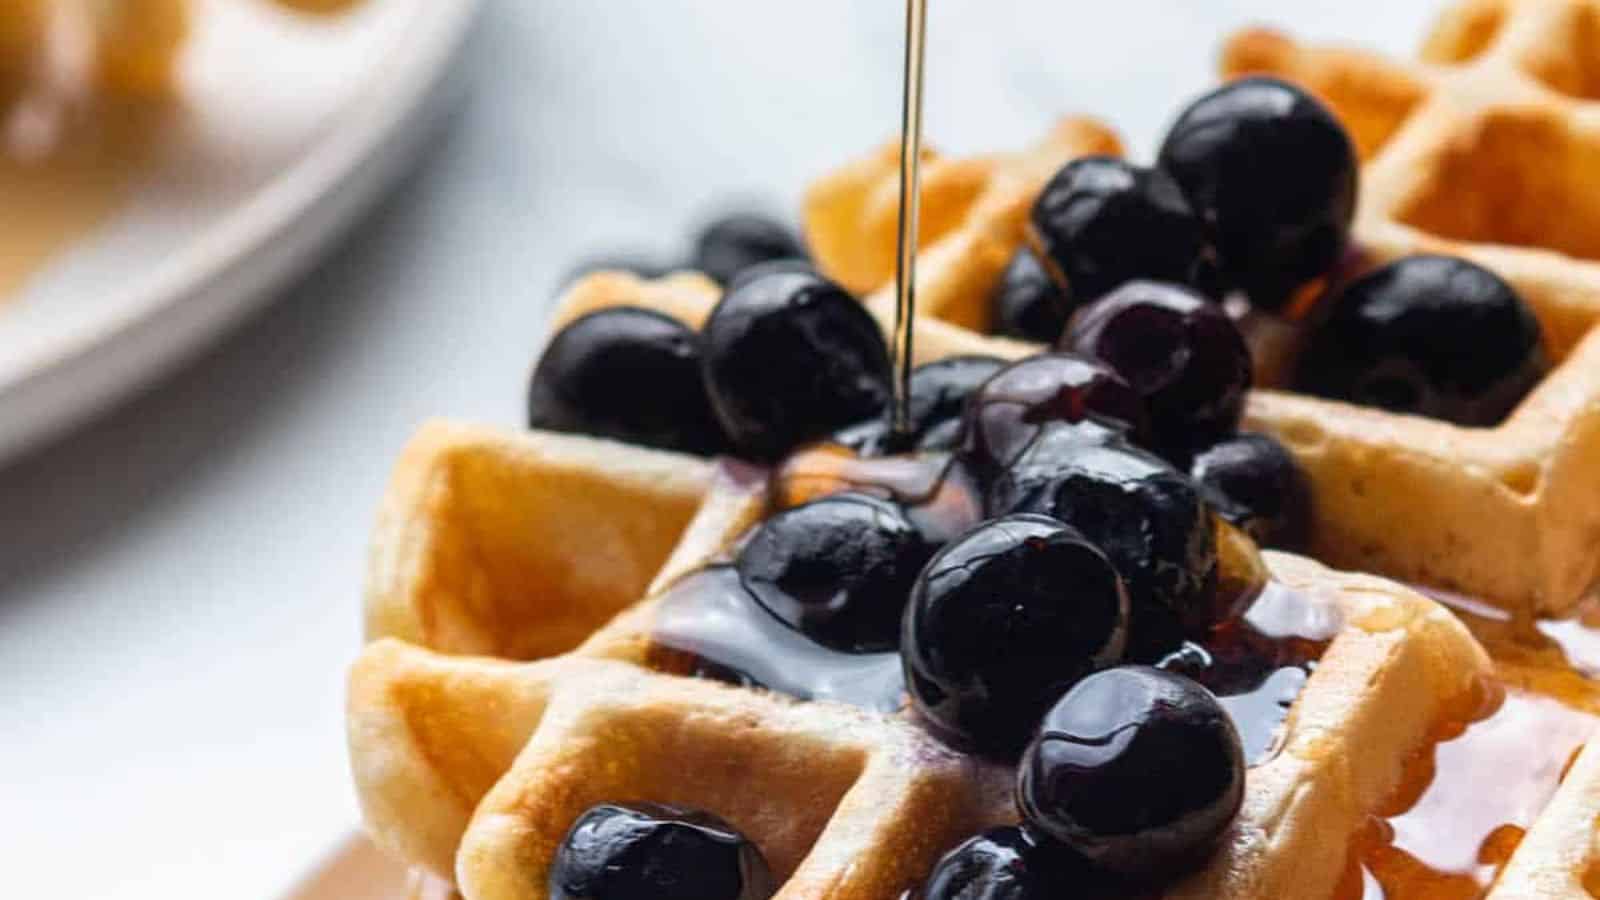 A waffle with blueberries and syrup.